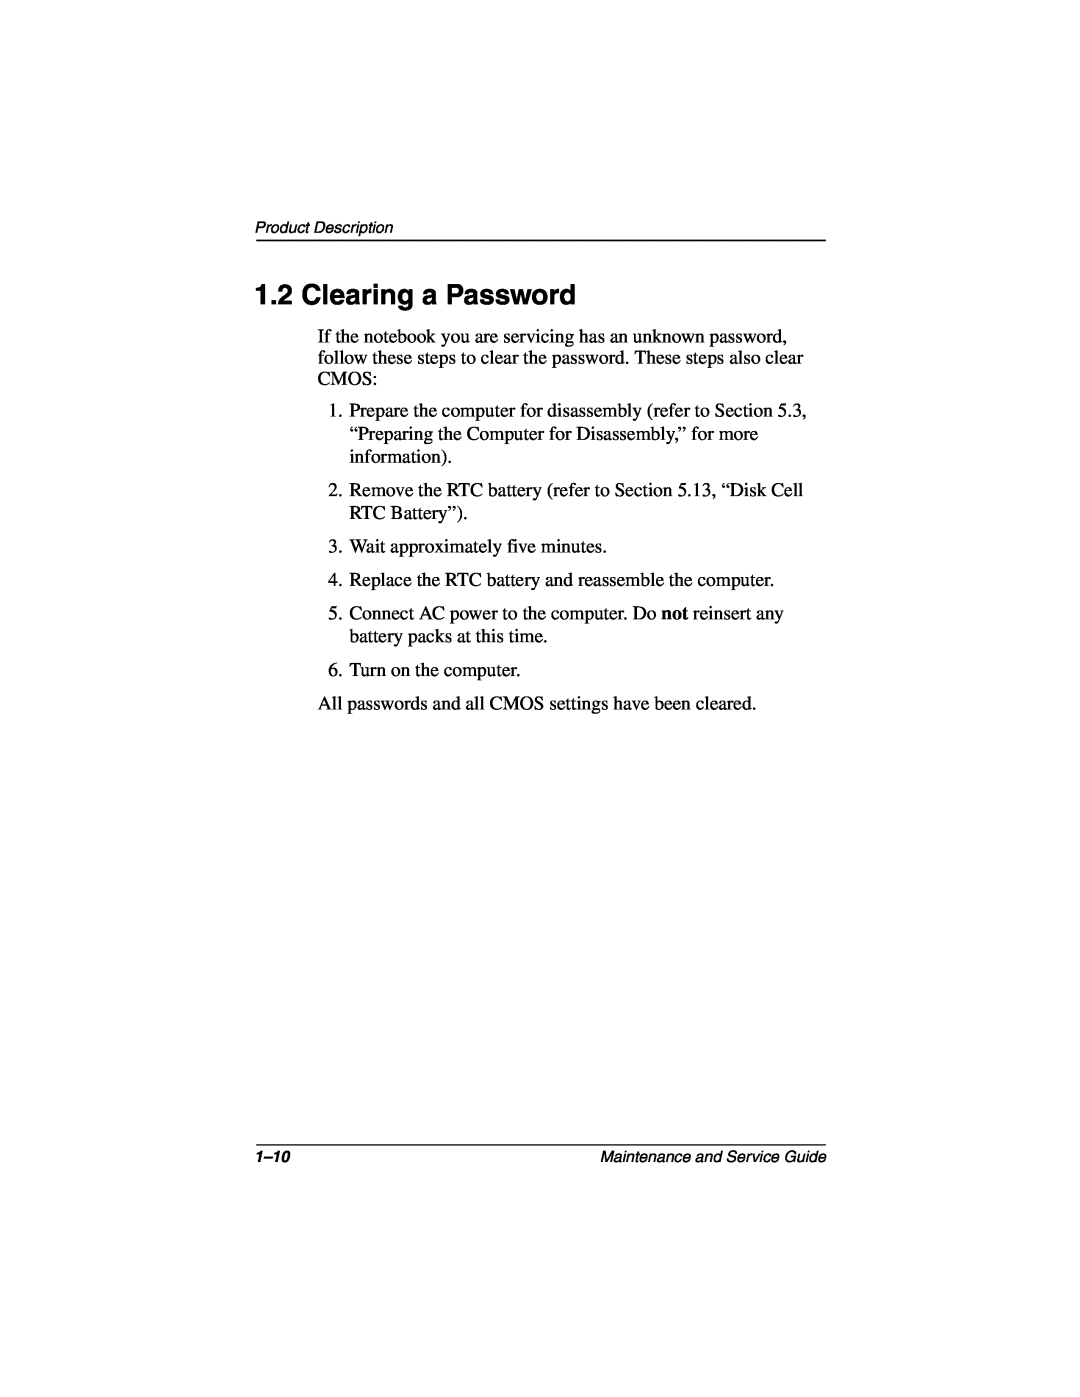 Compaq N160 manual Clearing a Password 